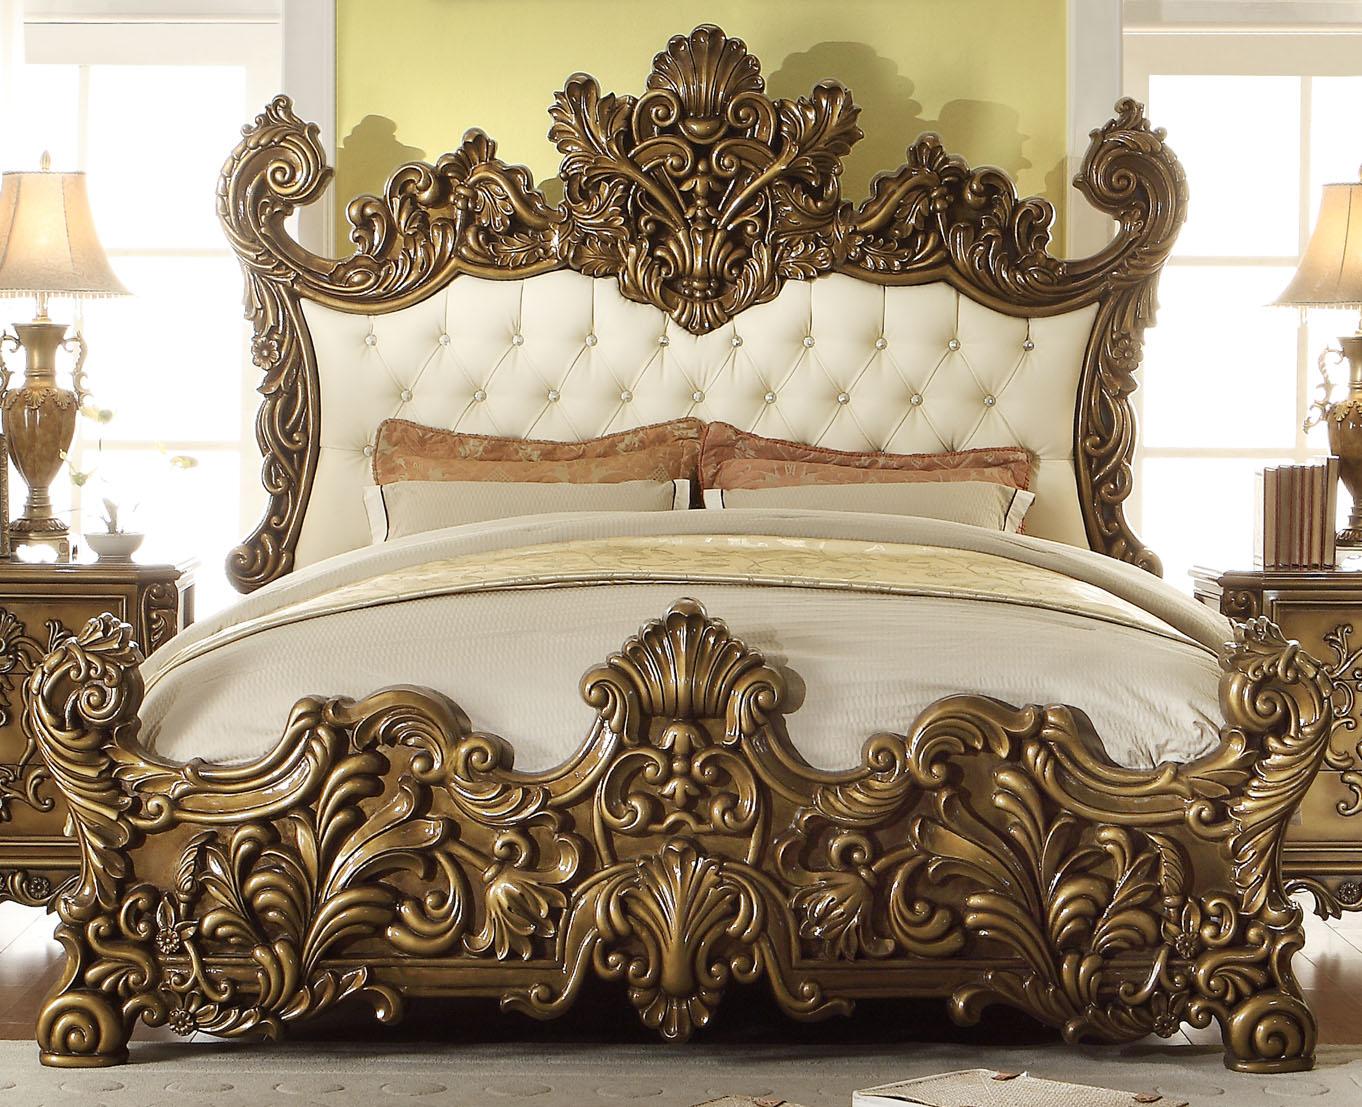 Traditional Panel Bed HD-8008 CK BED HD-8008 CK BED in Gold, Beige Leather